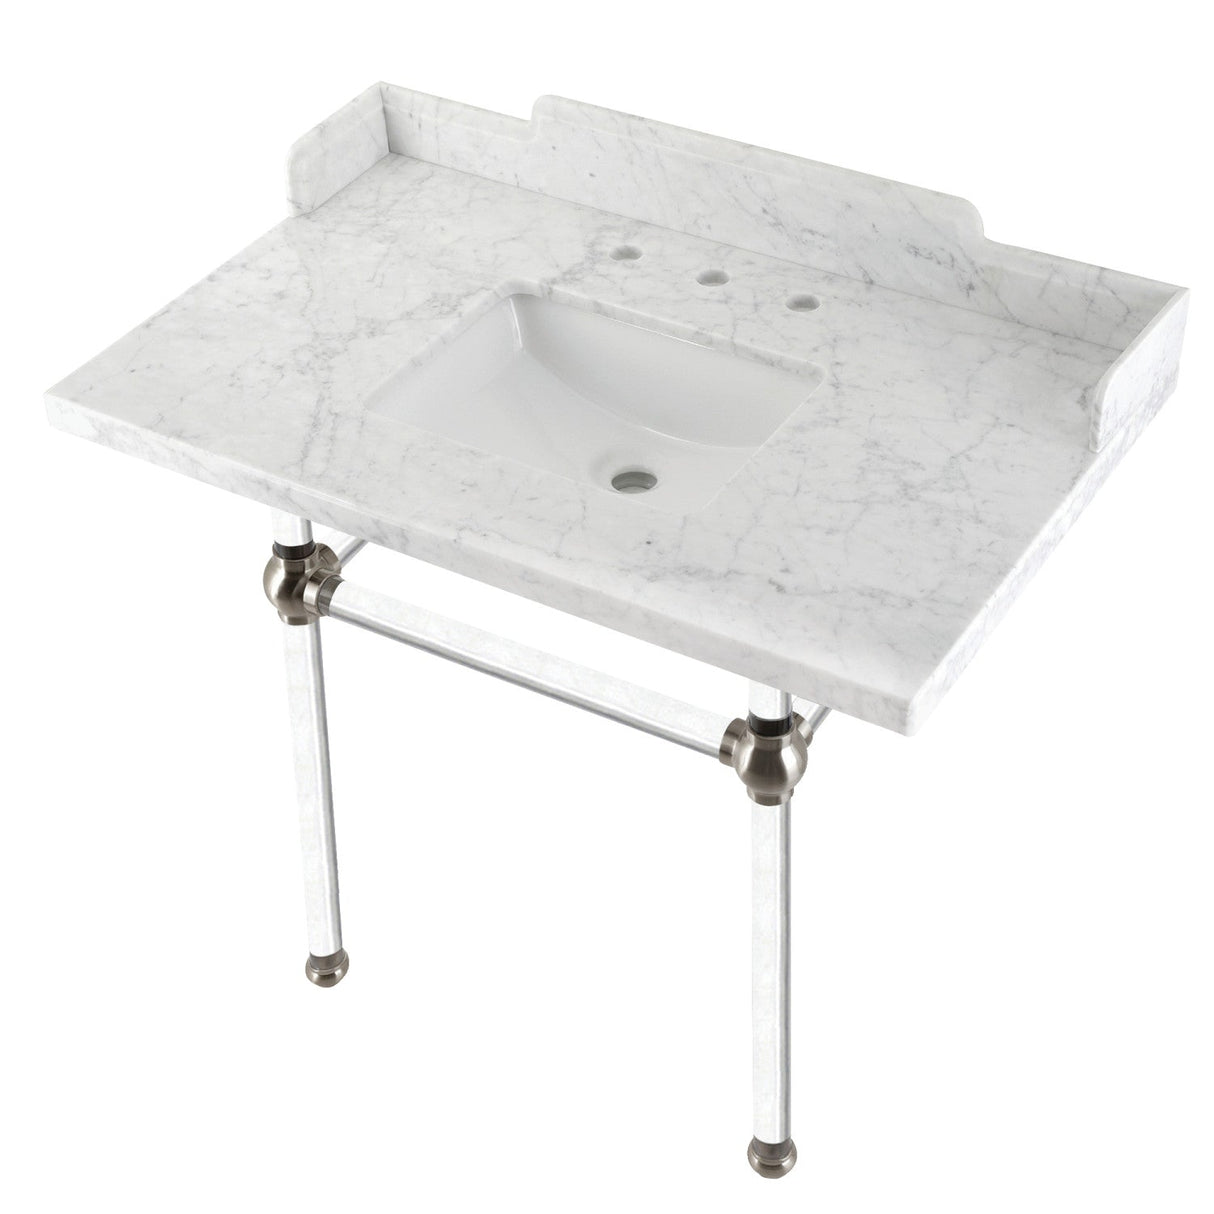 Fauceture LMS3630MASQ8 36-Inch Carrara Marble Console Sink with Acrylic Legs, Marble White/Brushed Nickel